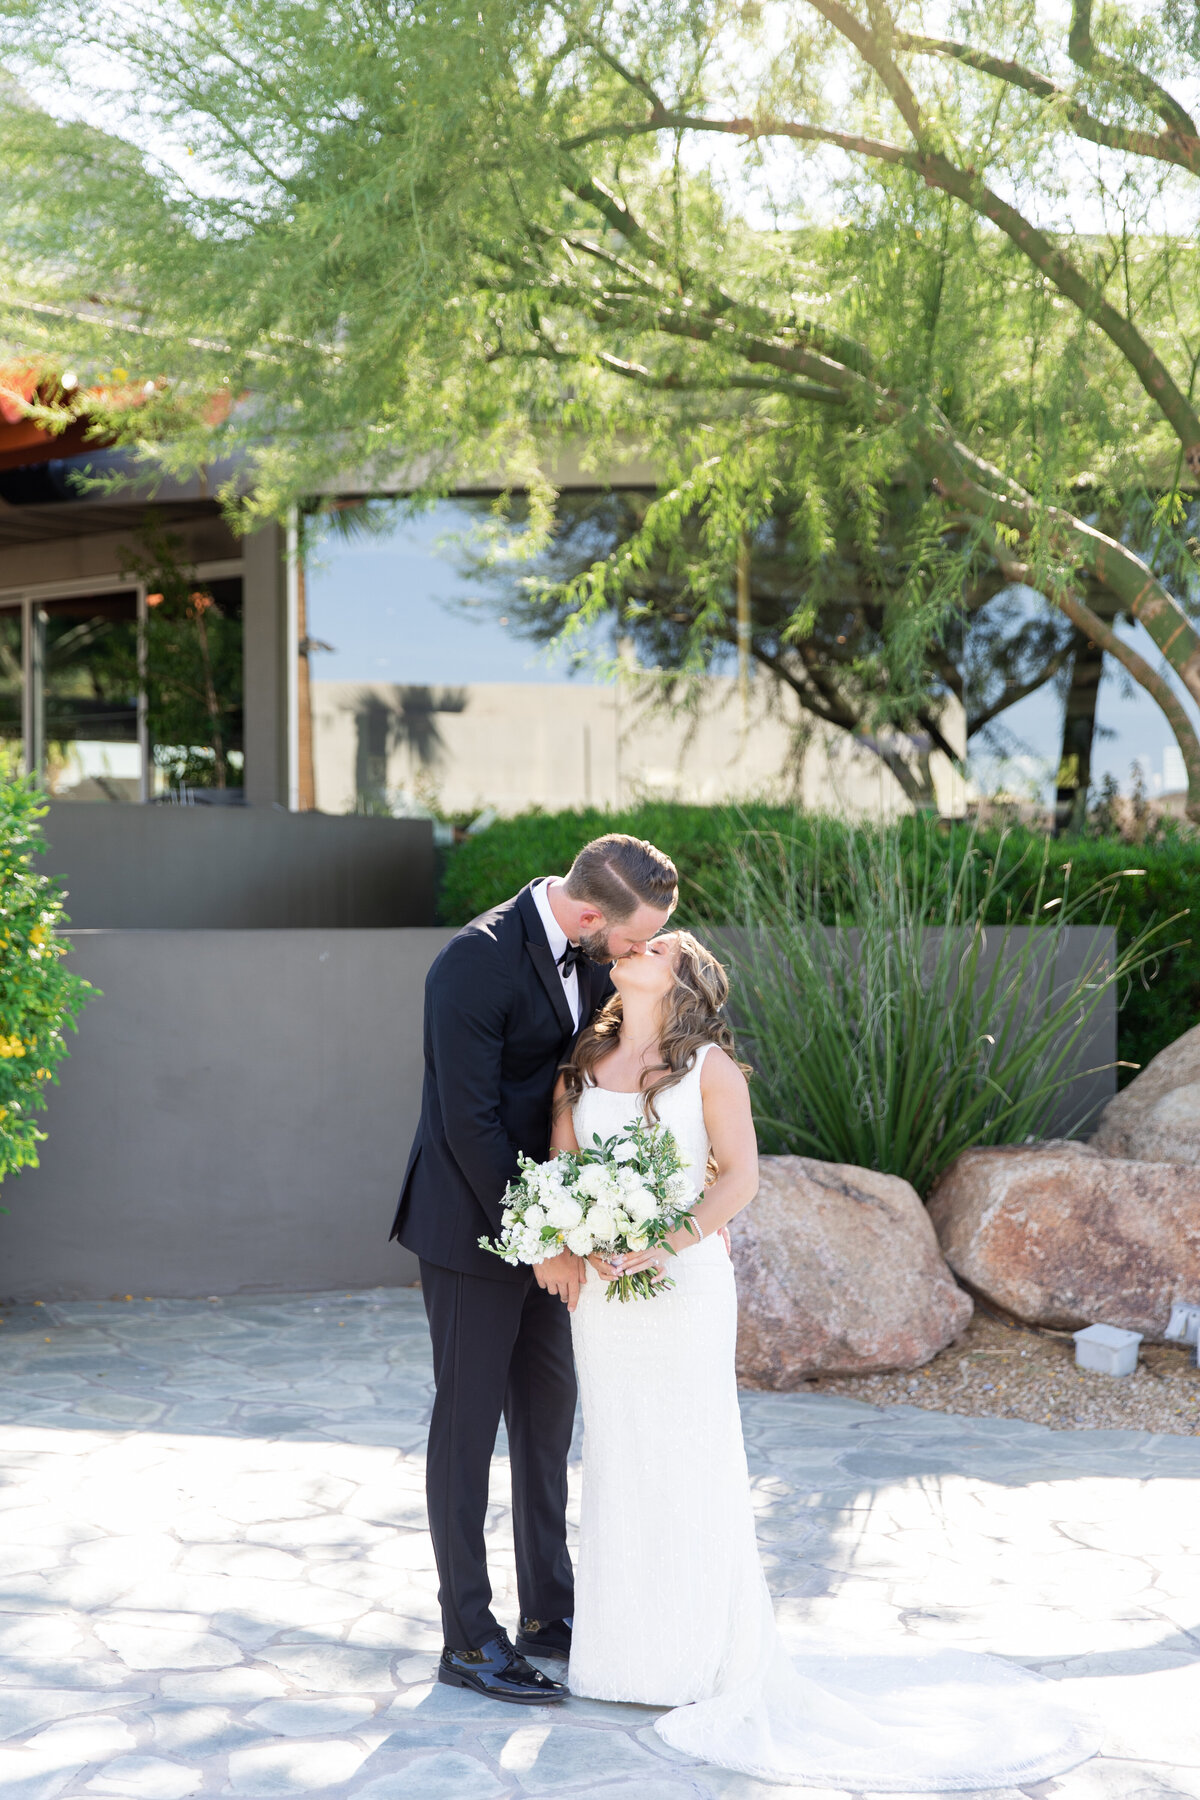 Karlie Colleen Photography - Josh & Jessica - Sanctuary Camelback Mountain Resort - Paradise Valley Arizona - Outstanding Occasions-62